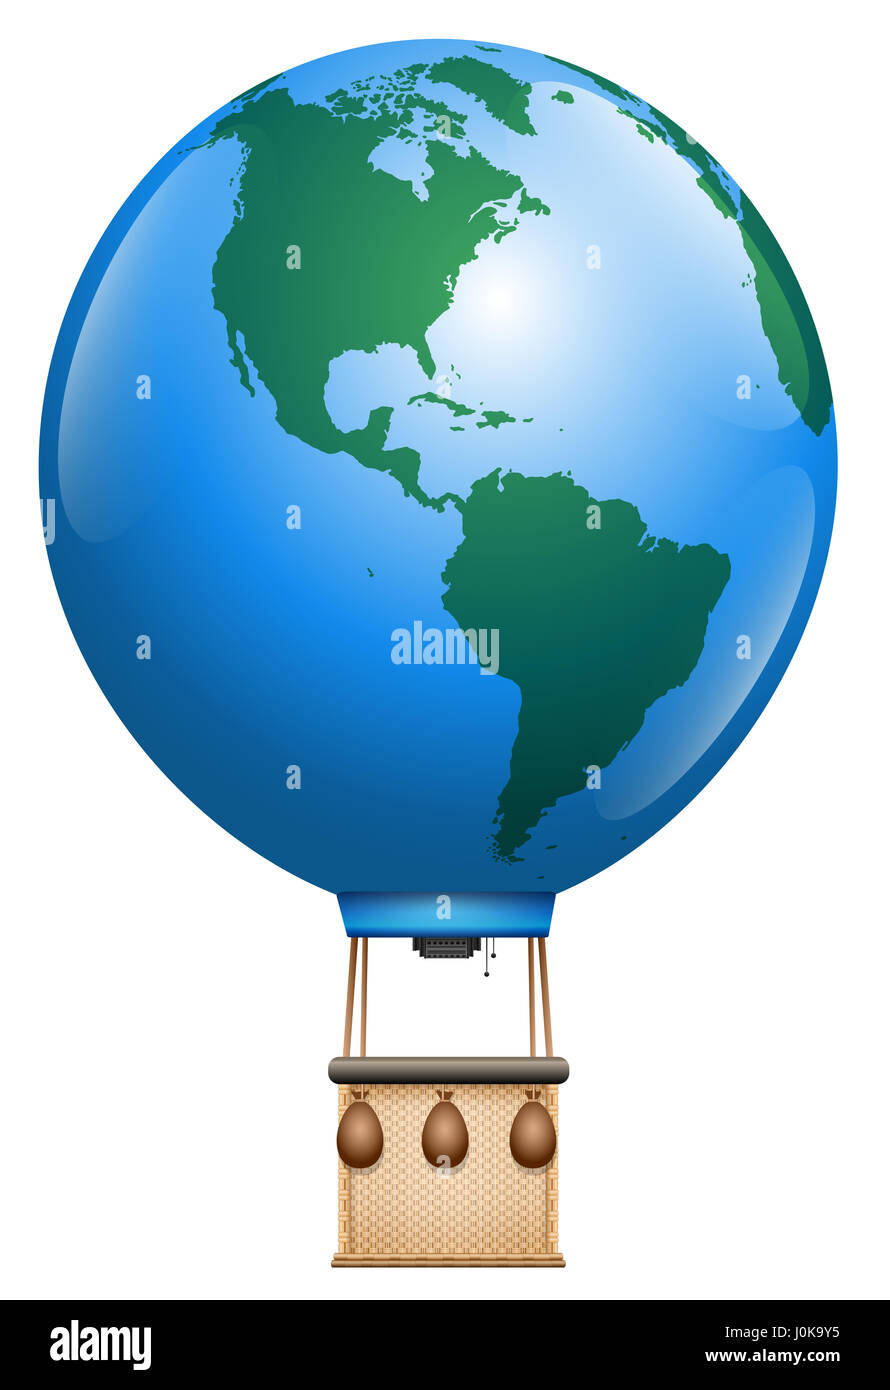 Hot air balloon - planet earth with basket - symbol for round the world trip or other global aviation issues - isolated illustration on white. Stock Photo